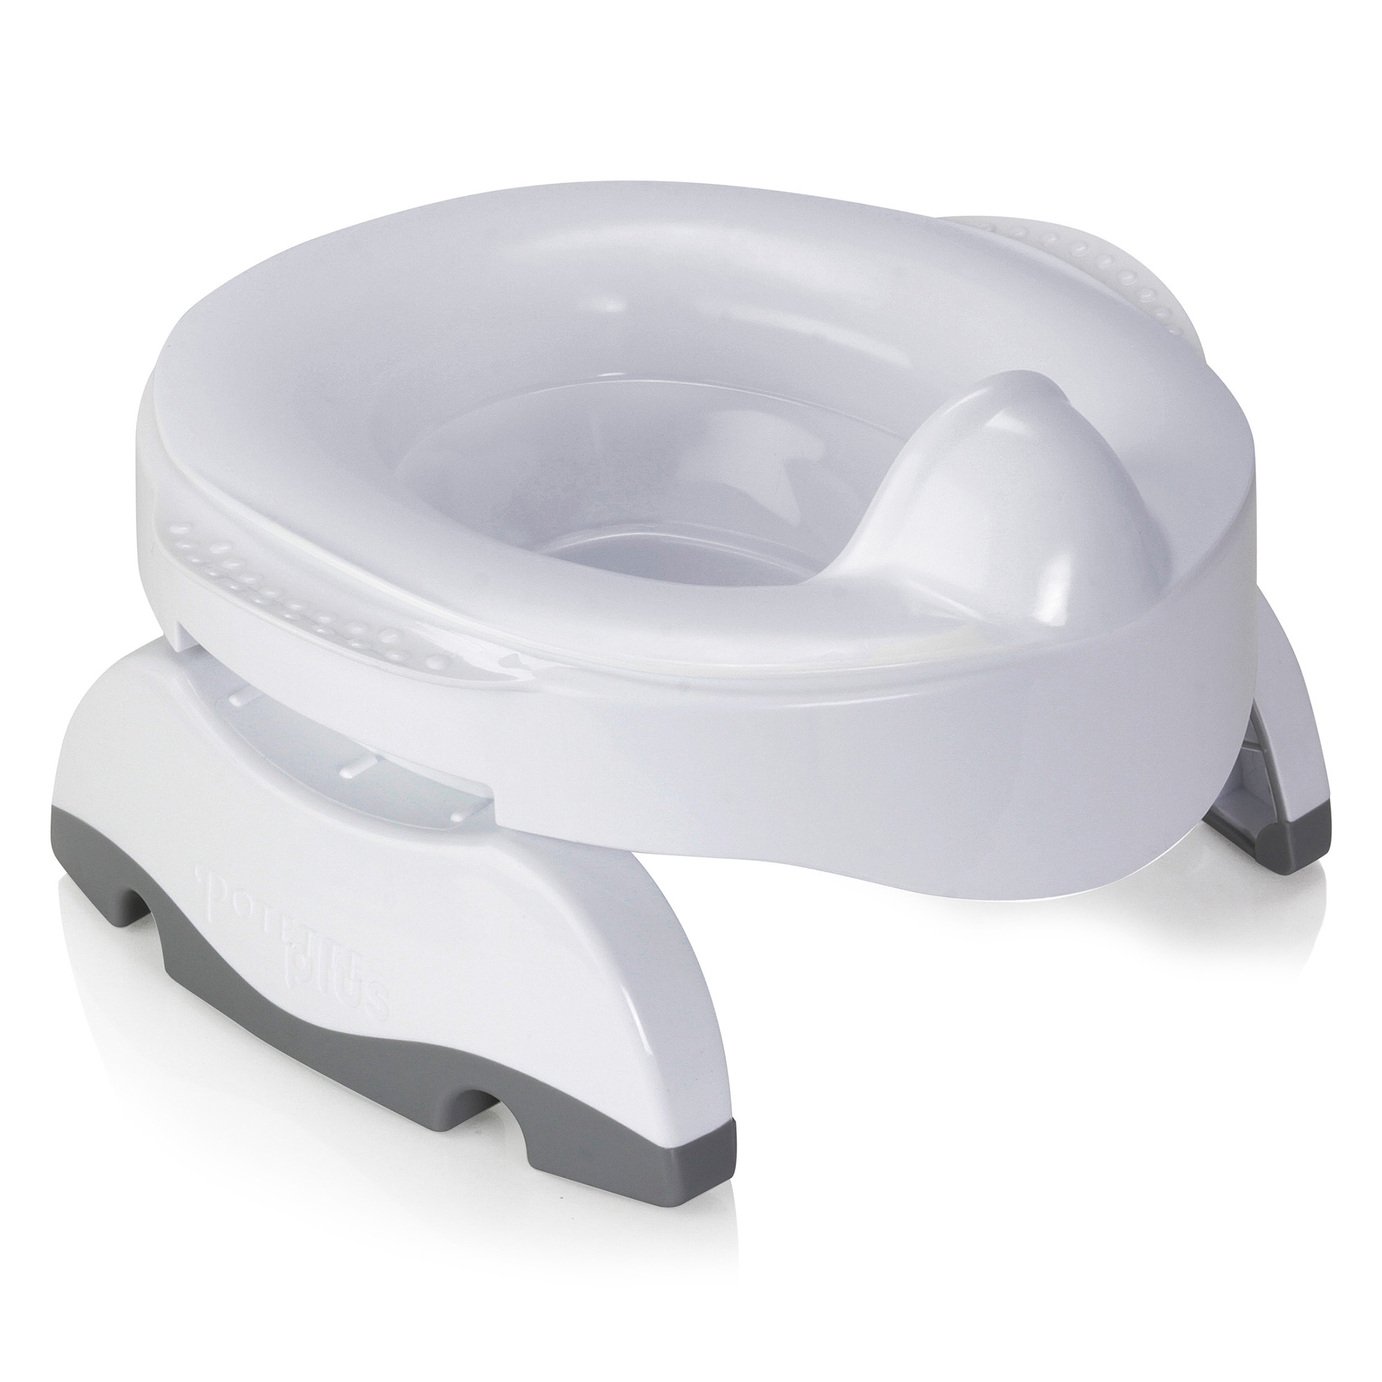 Potette Max Portable Potty & Toilet Trainer Seat with Liners Review